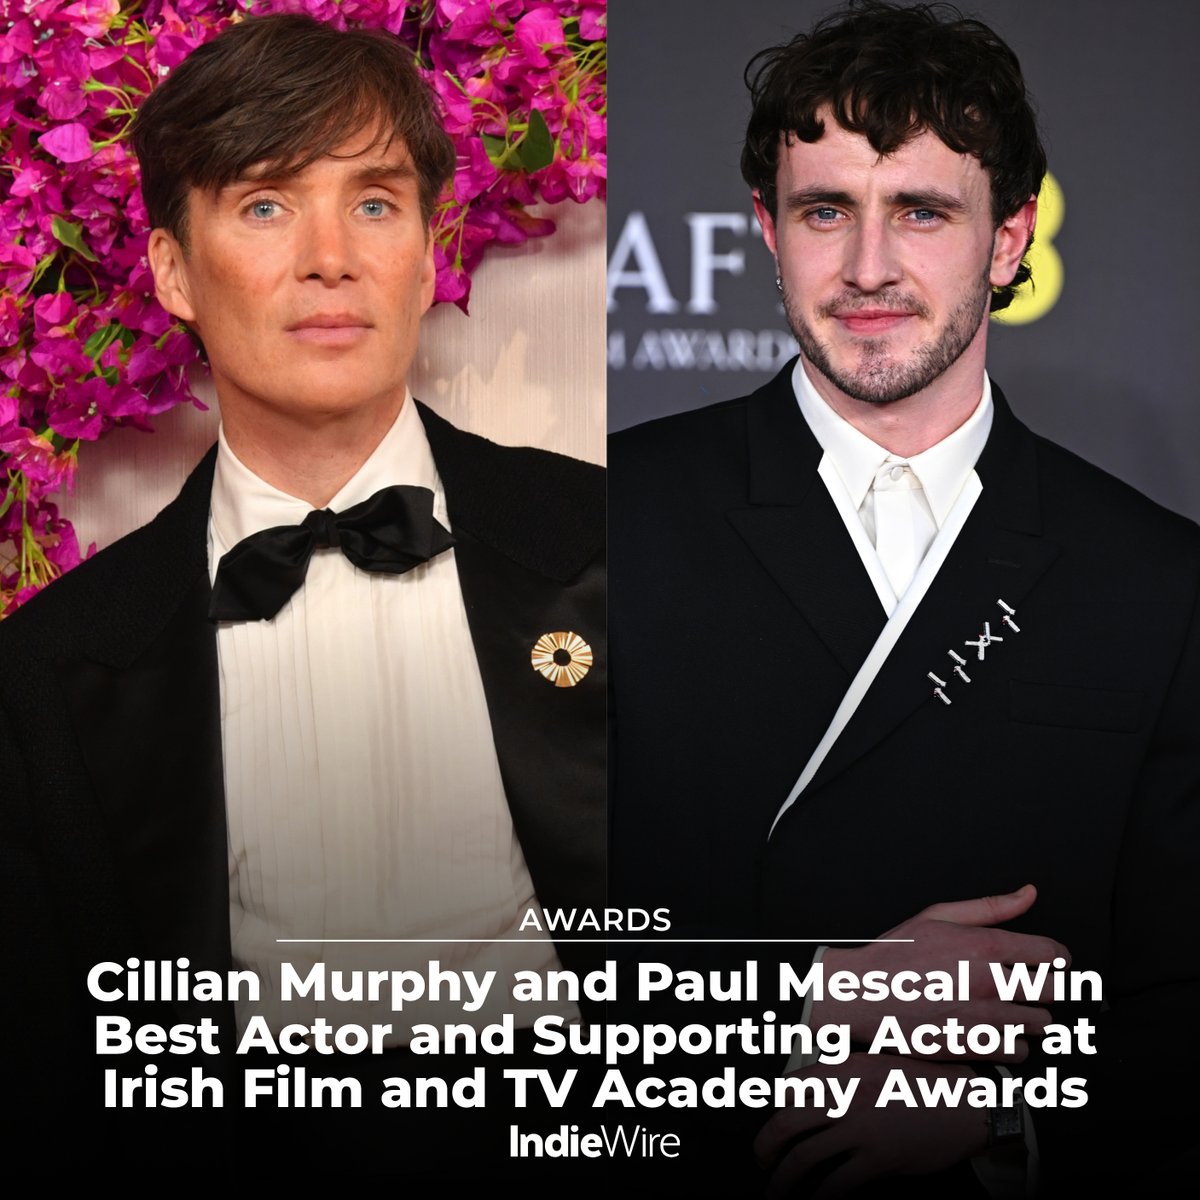 Cillian Murphy completed the award season that saw him win his first Oscar by accepting an award in his native Ireland. Read the complete winners list for the Irish Film and TV Academy Awards: trib.al/3NGJ6hn